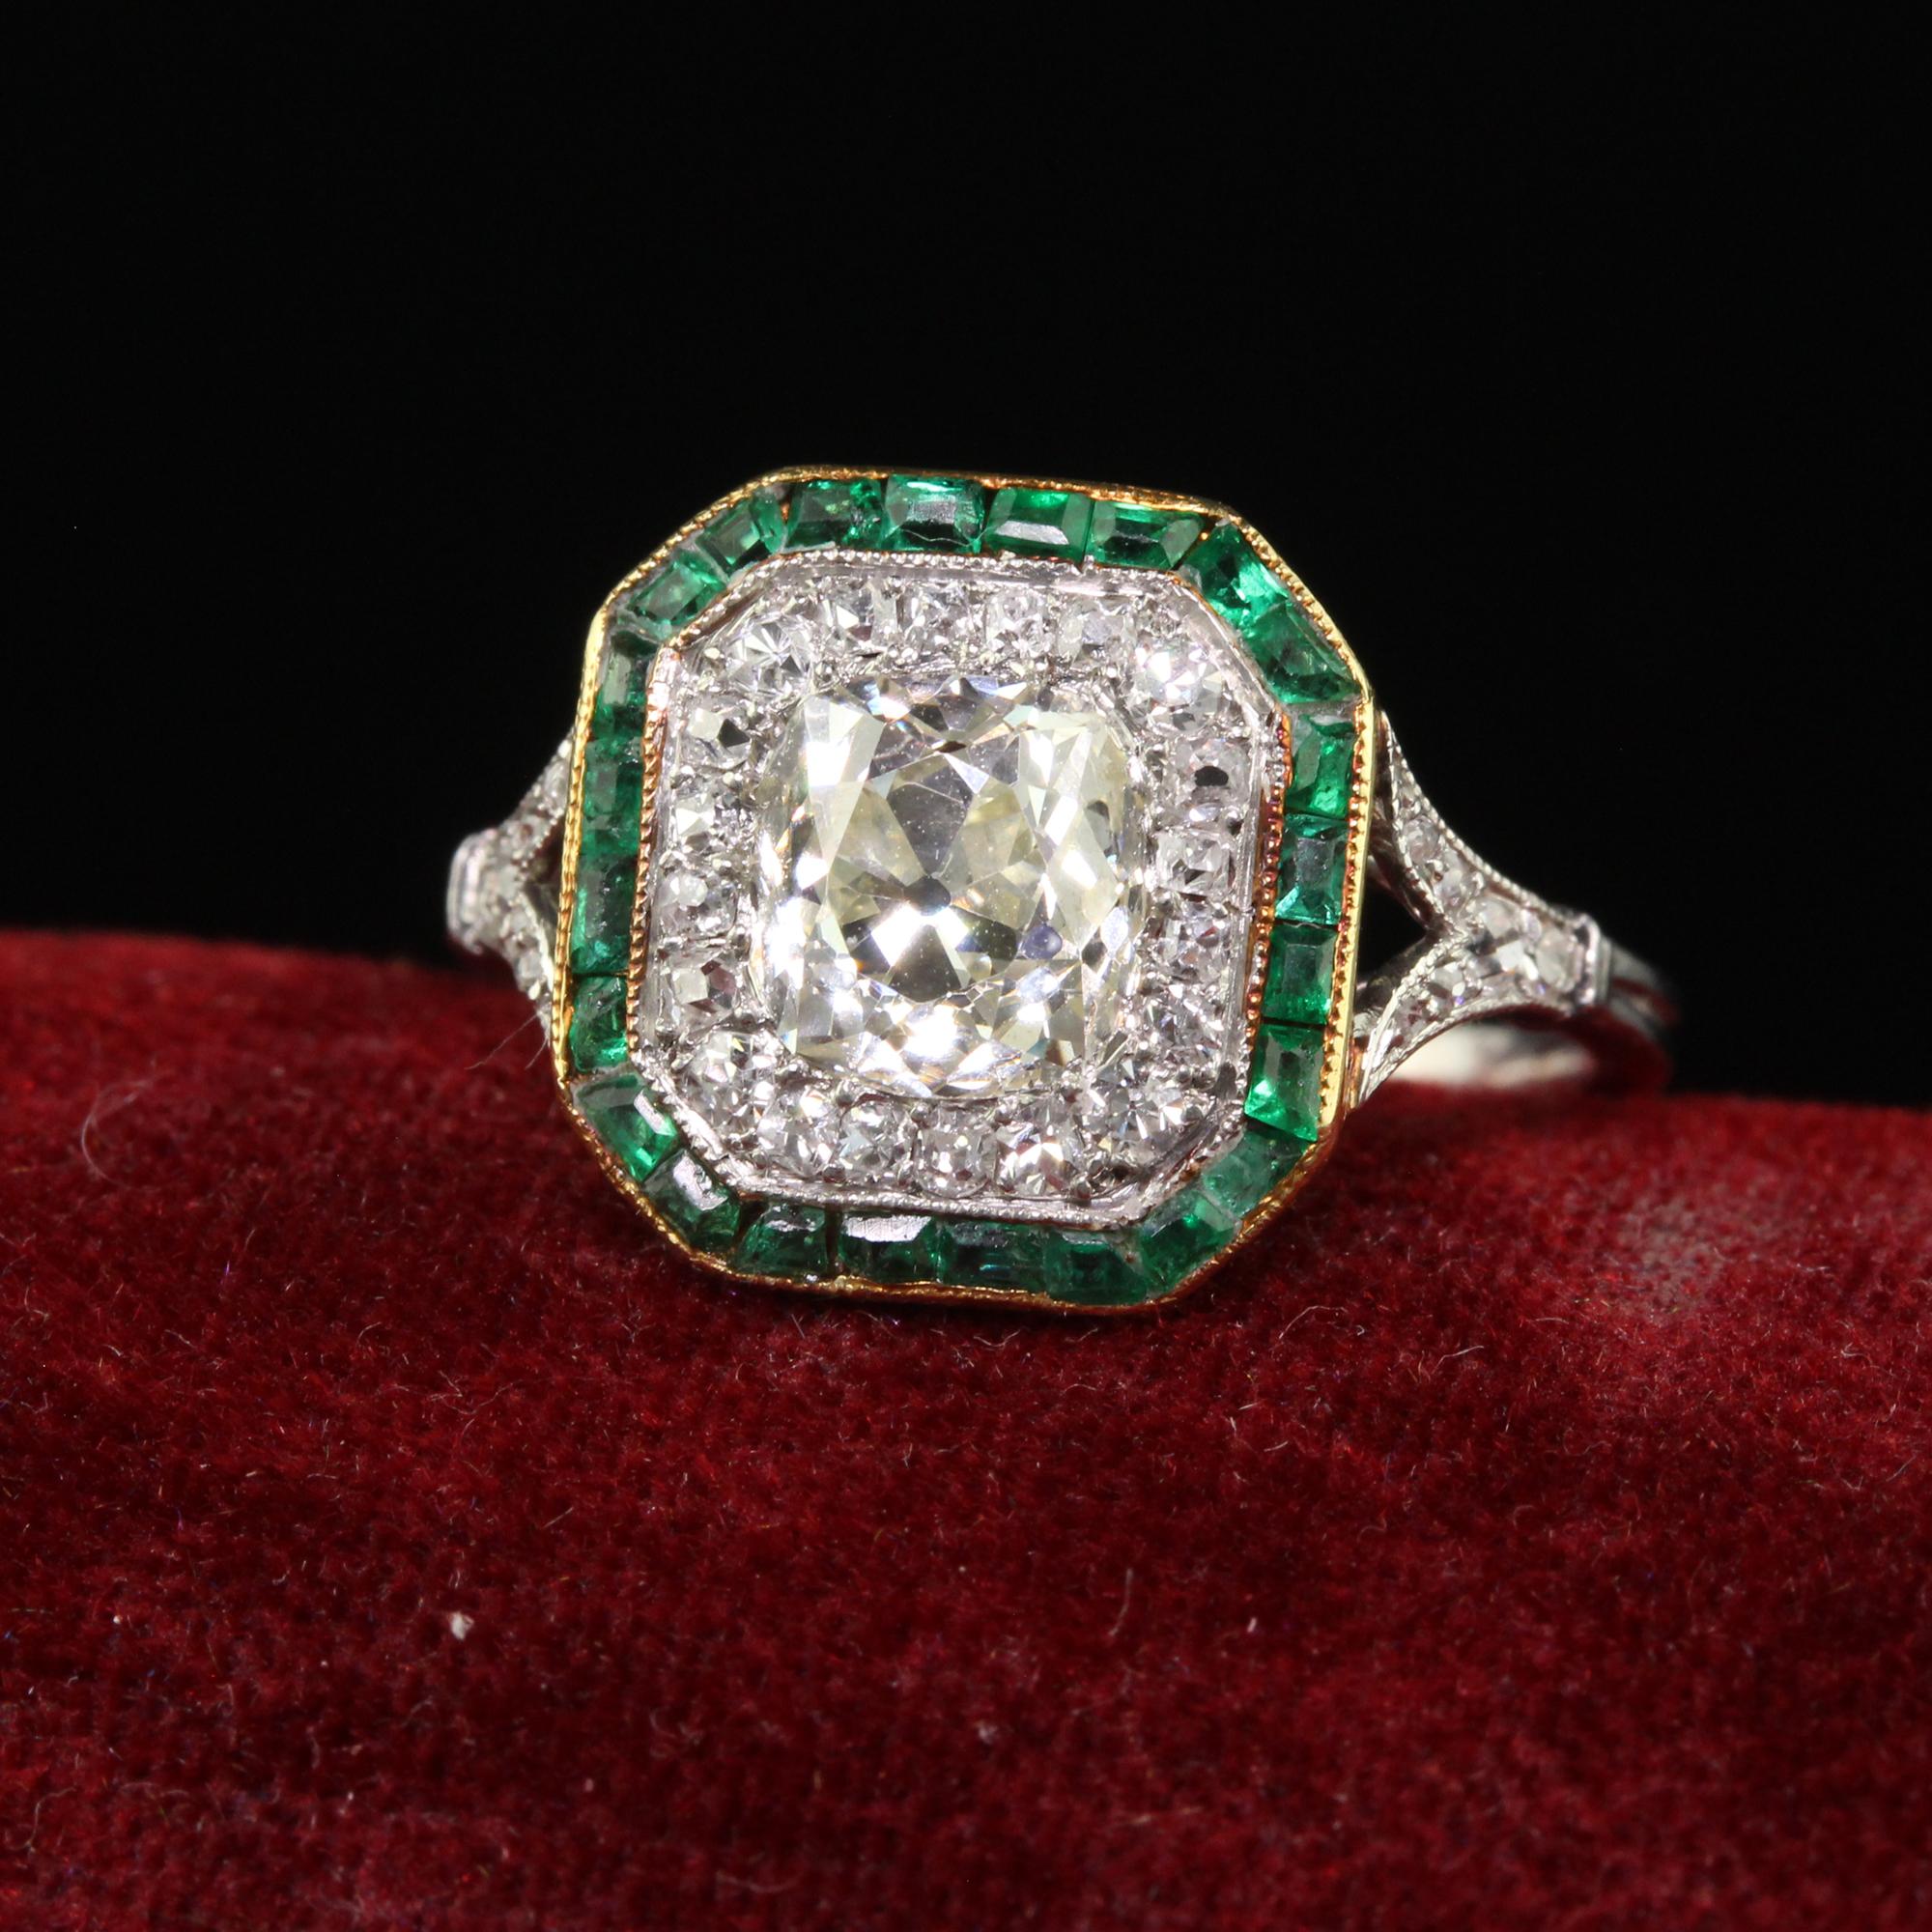 Beautiful Antique Edwardian Platinum Old Mine Diamond and Emerald Engagement Ring. This incredible Edwardian old mine diamond engagement ring is crafted in platinum and 18k yellow gold. The center holds a chunky old mine cut diamond that is